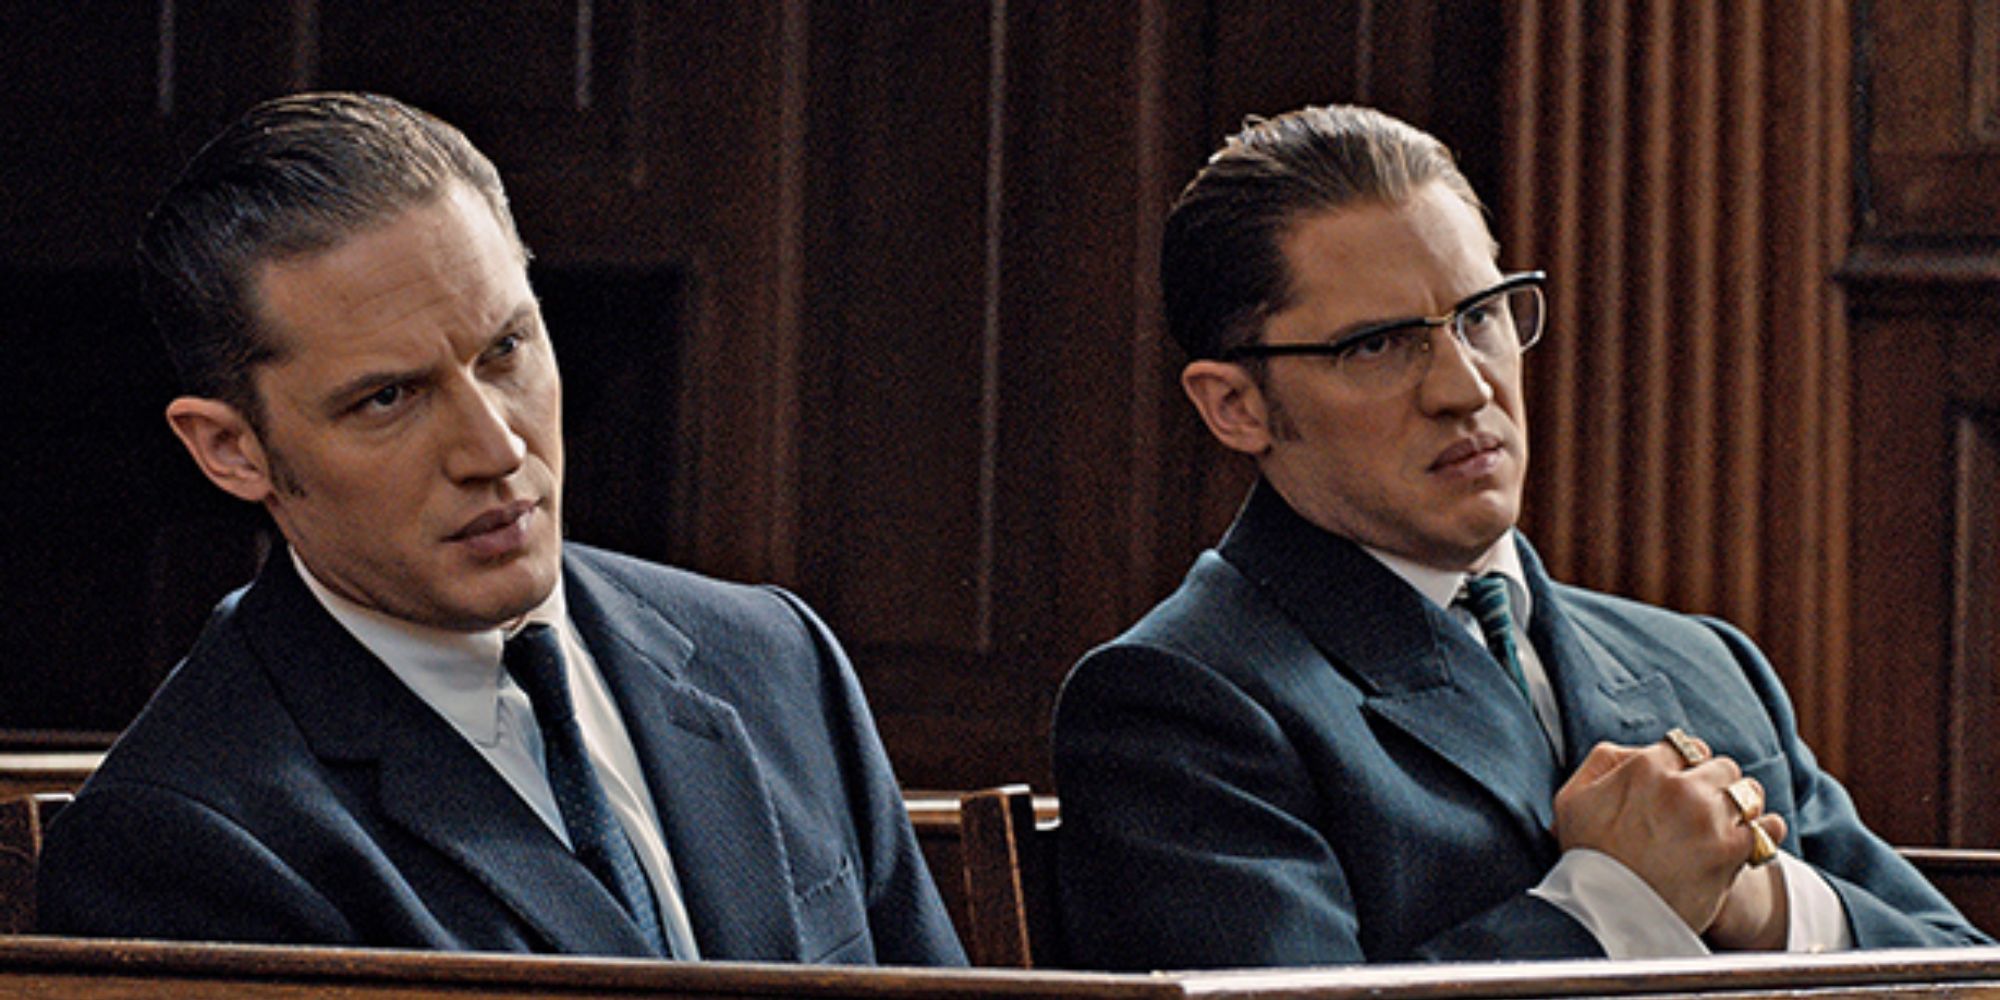 The Kray brothers sitting next to each other at court in Legend.